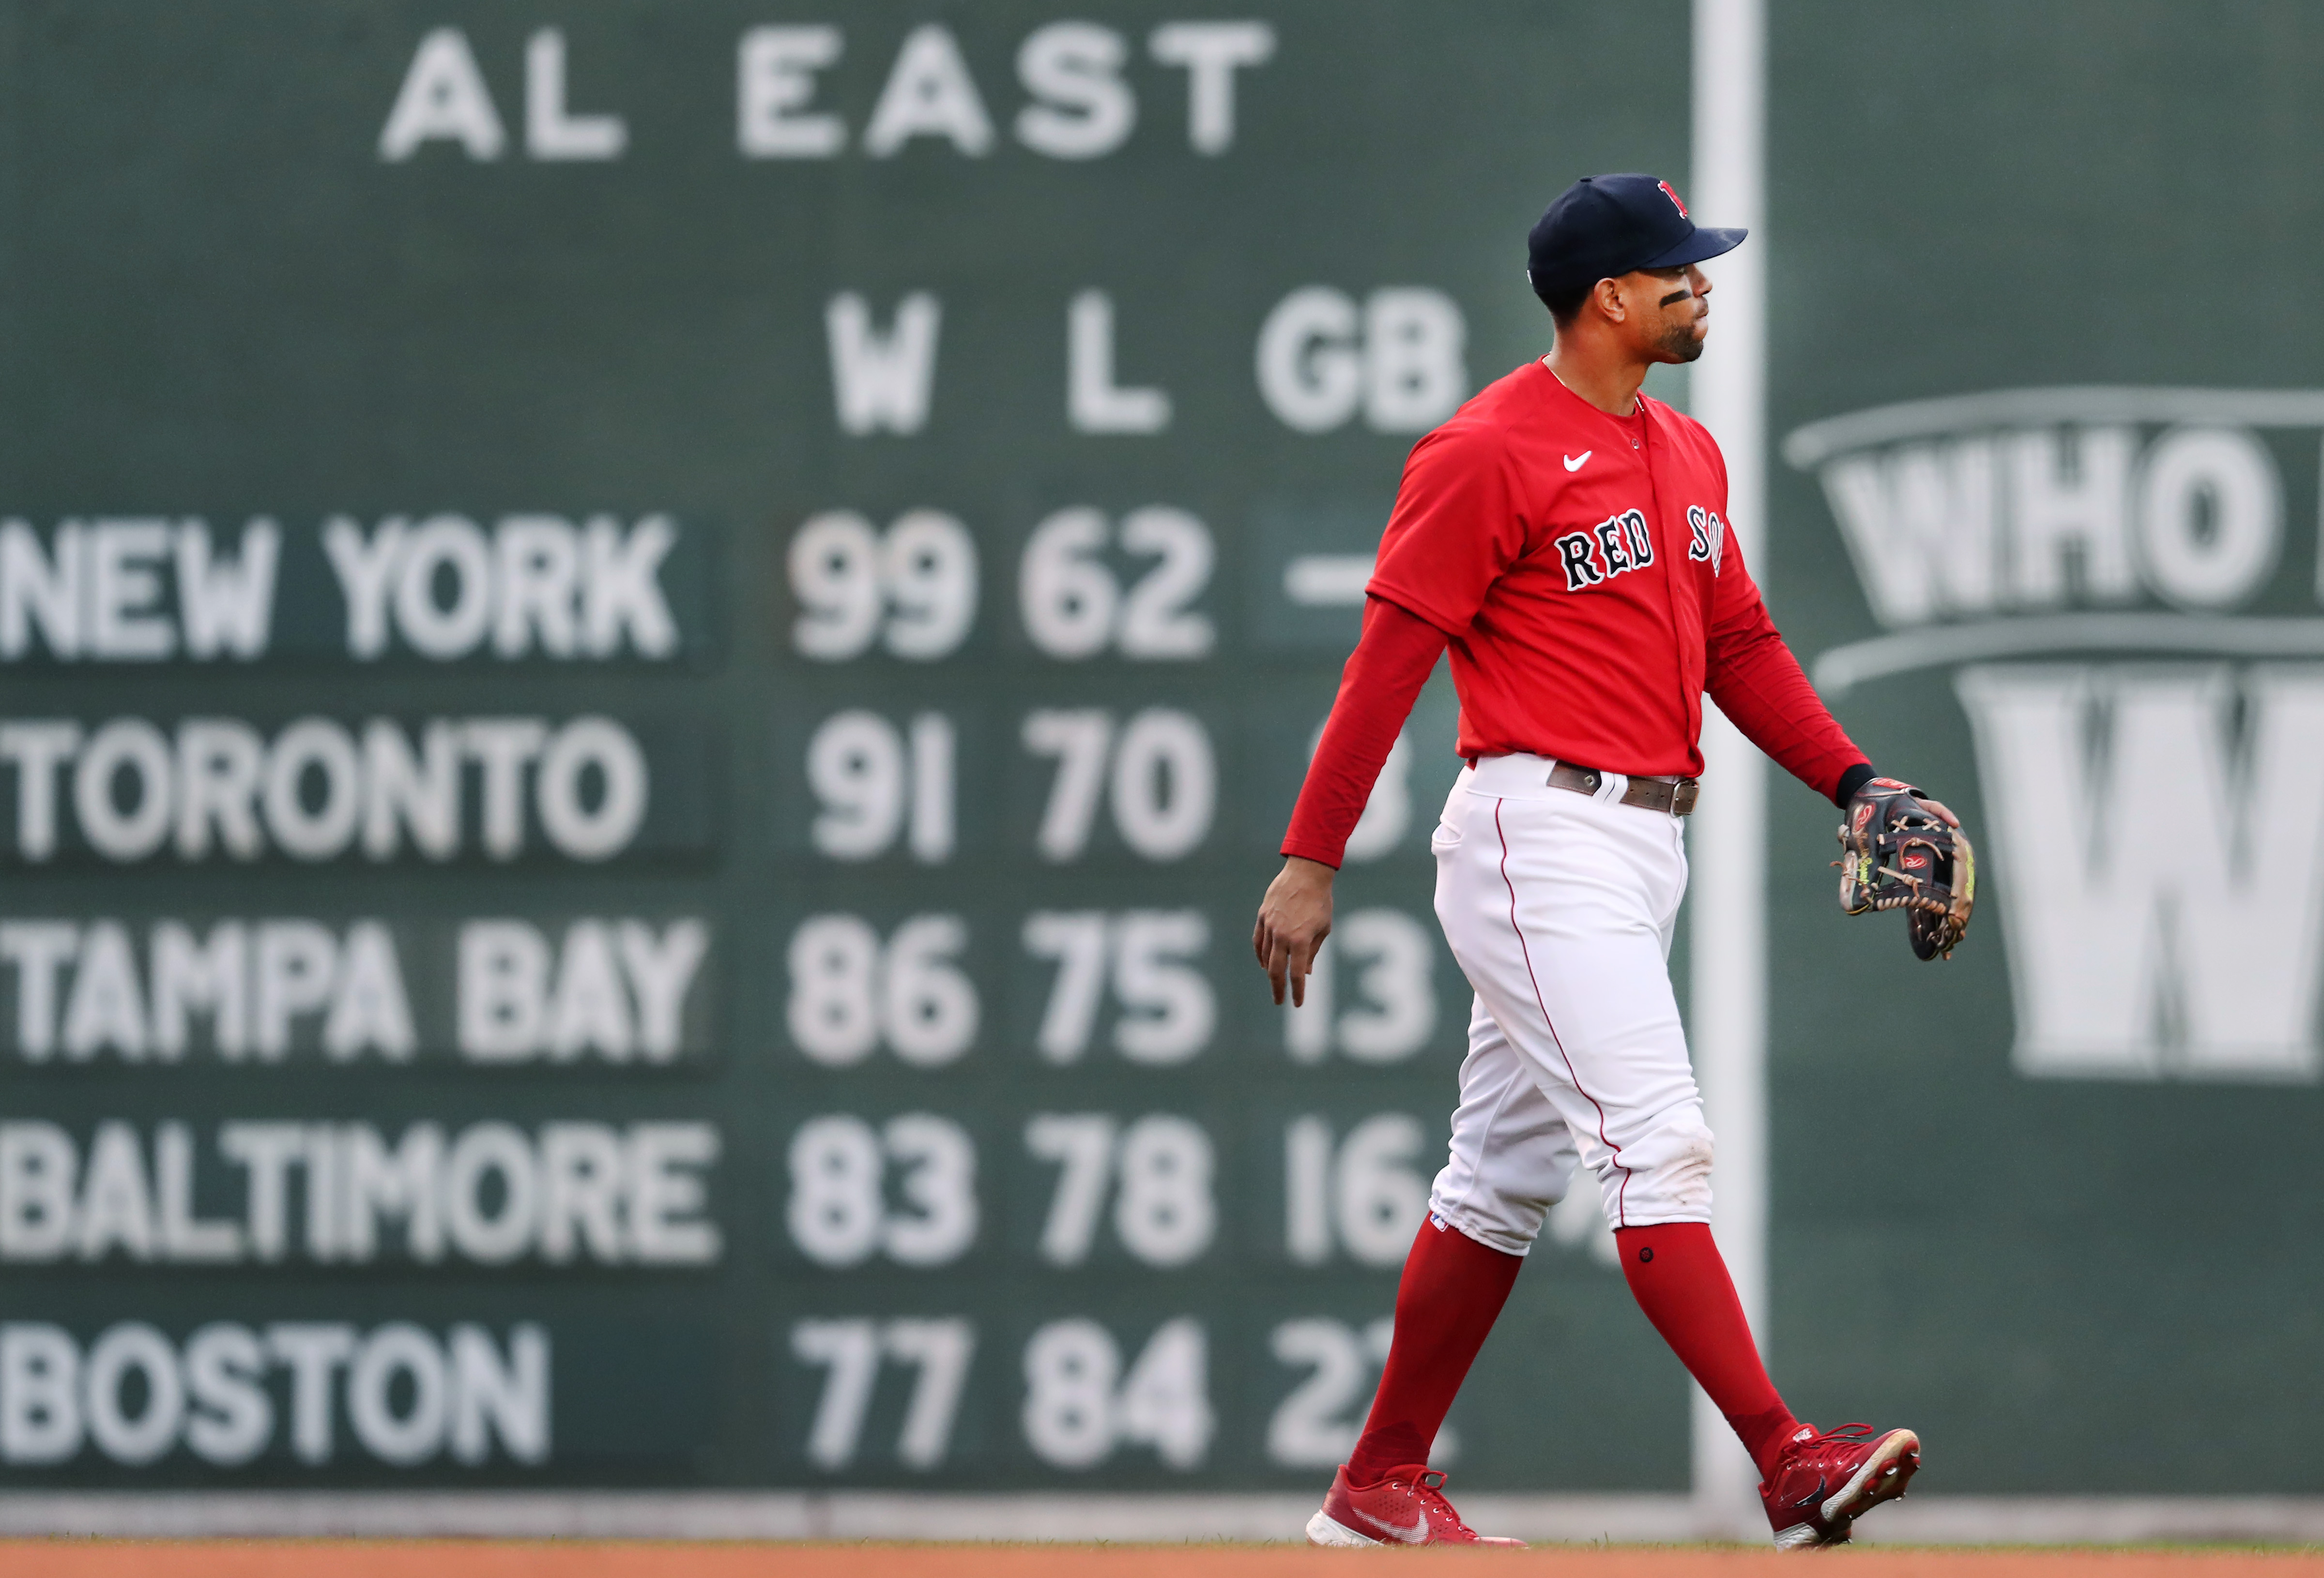 player of the week – Blogging the Red Sox